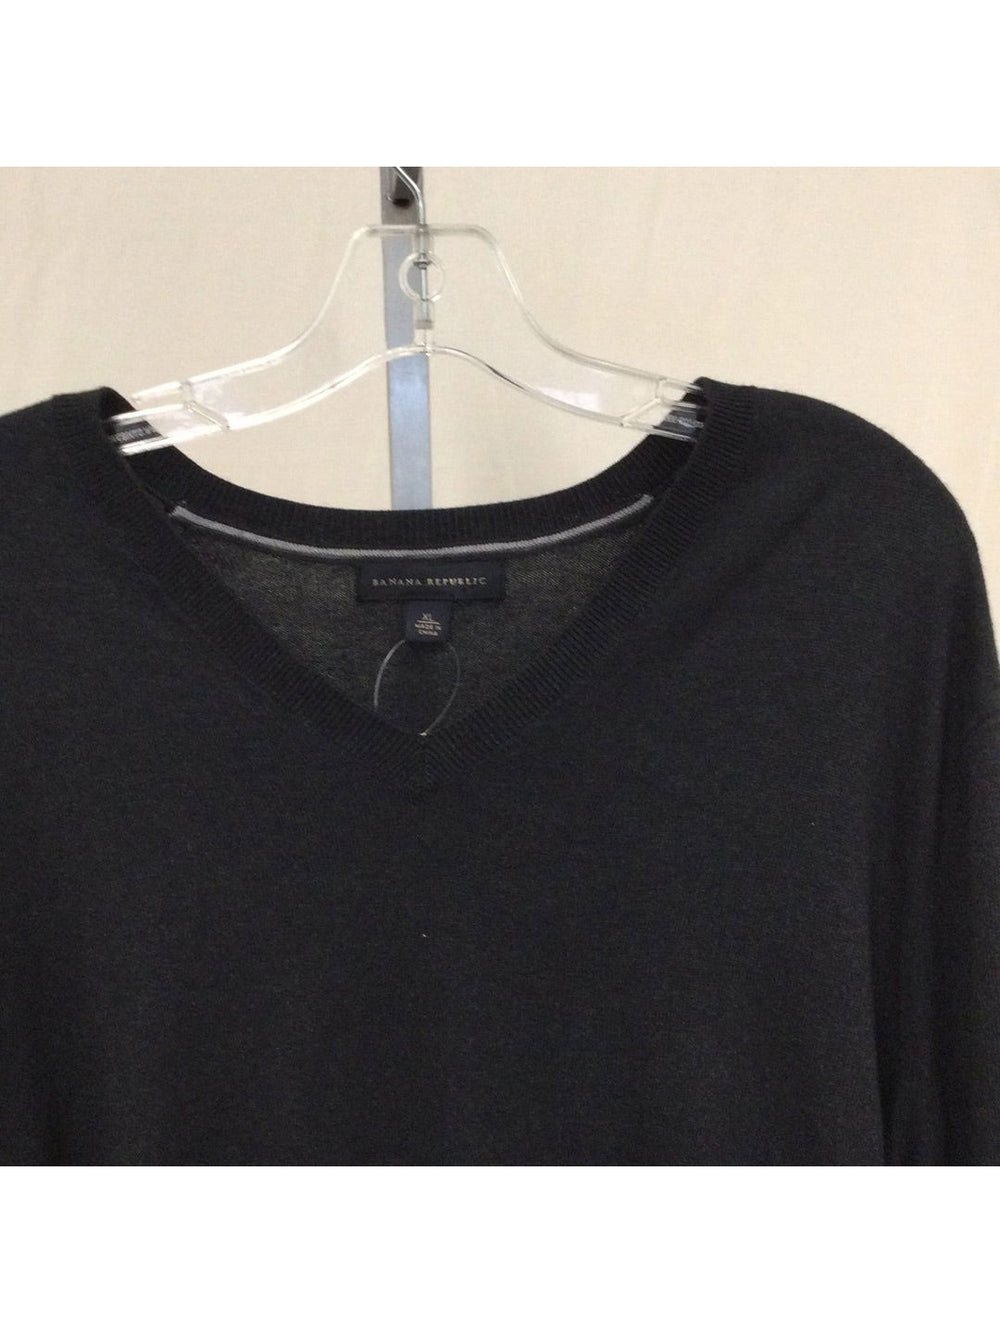 Banana Republic Men Long Sleeve Black Sweater - The Kennedy Collective Thrift - 